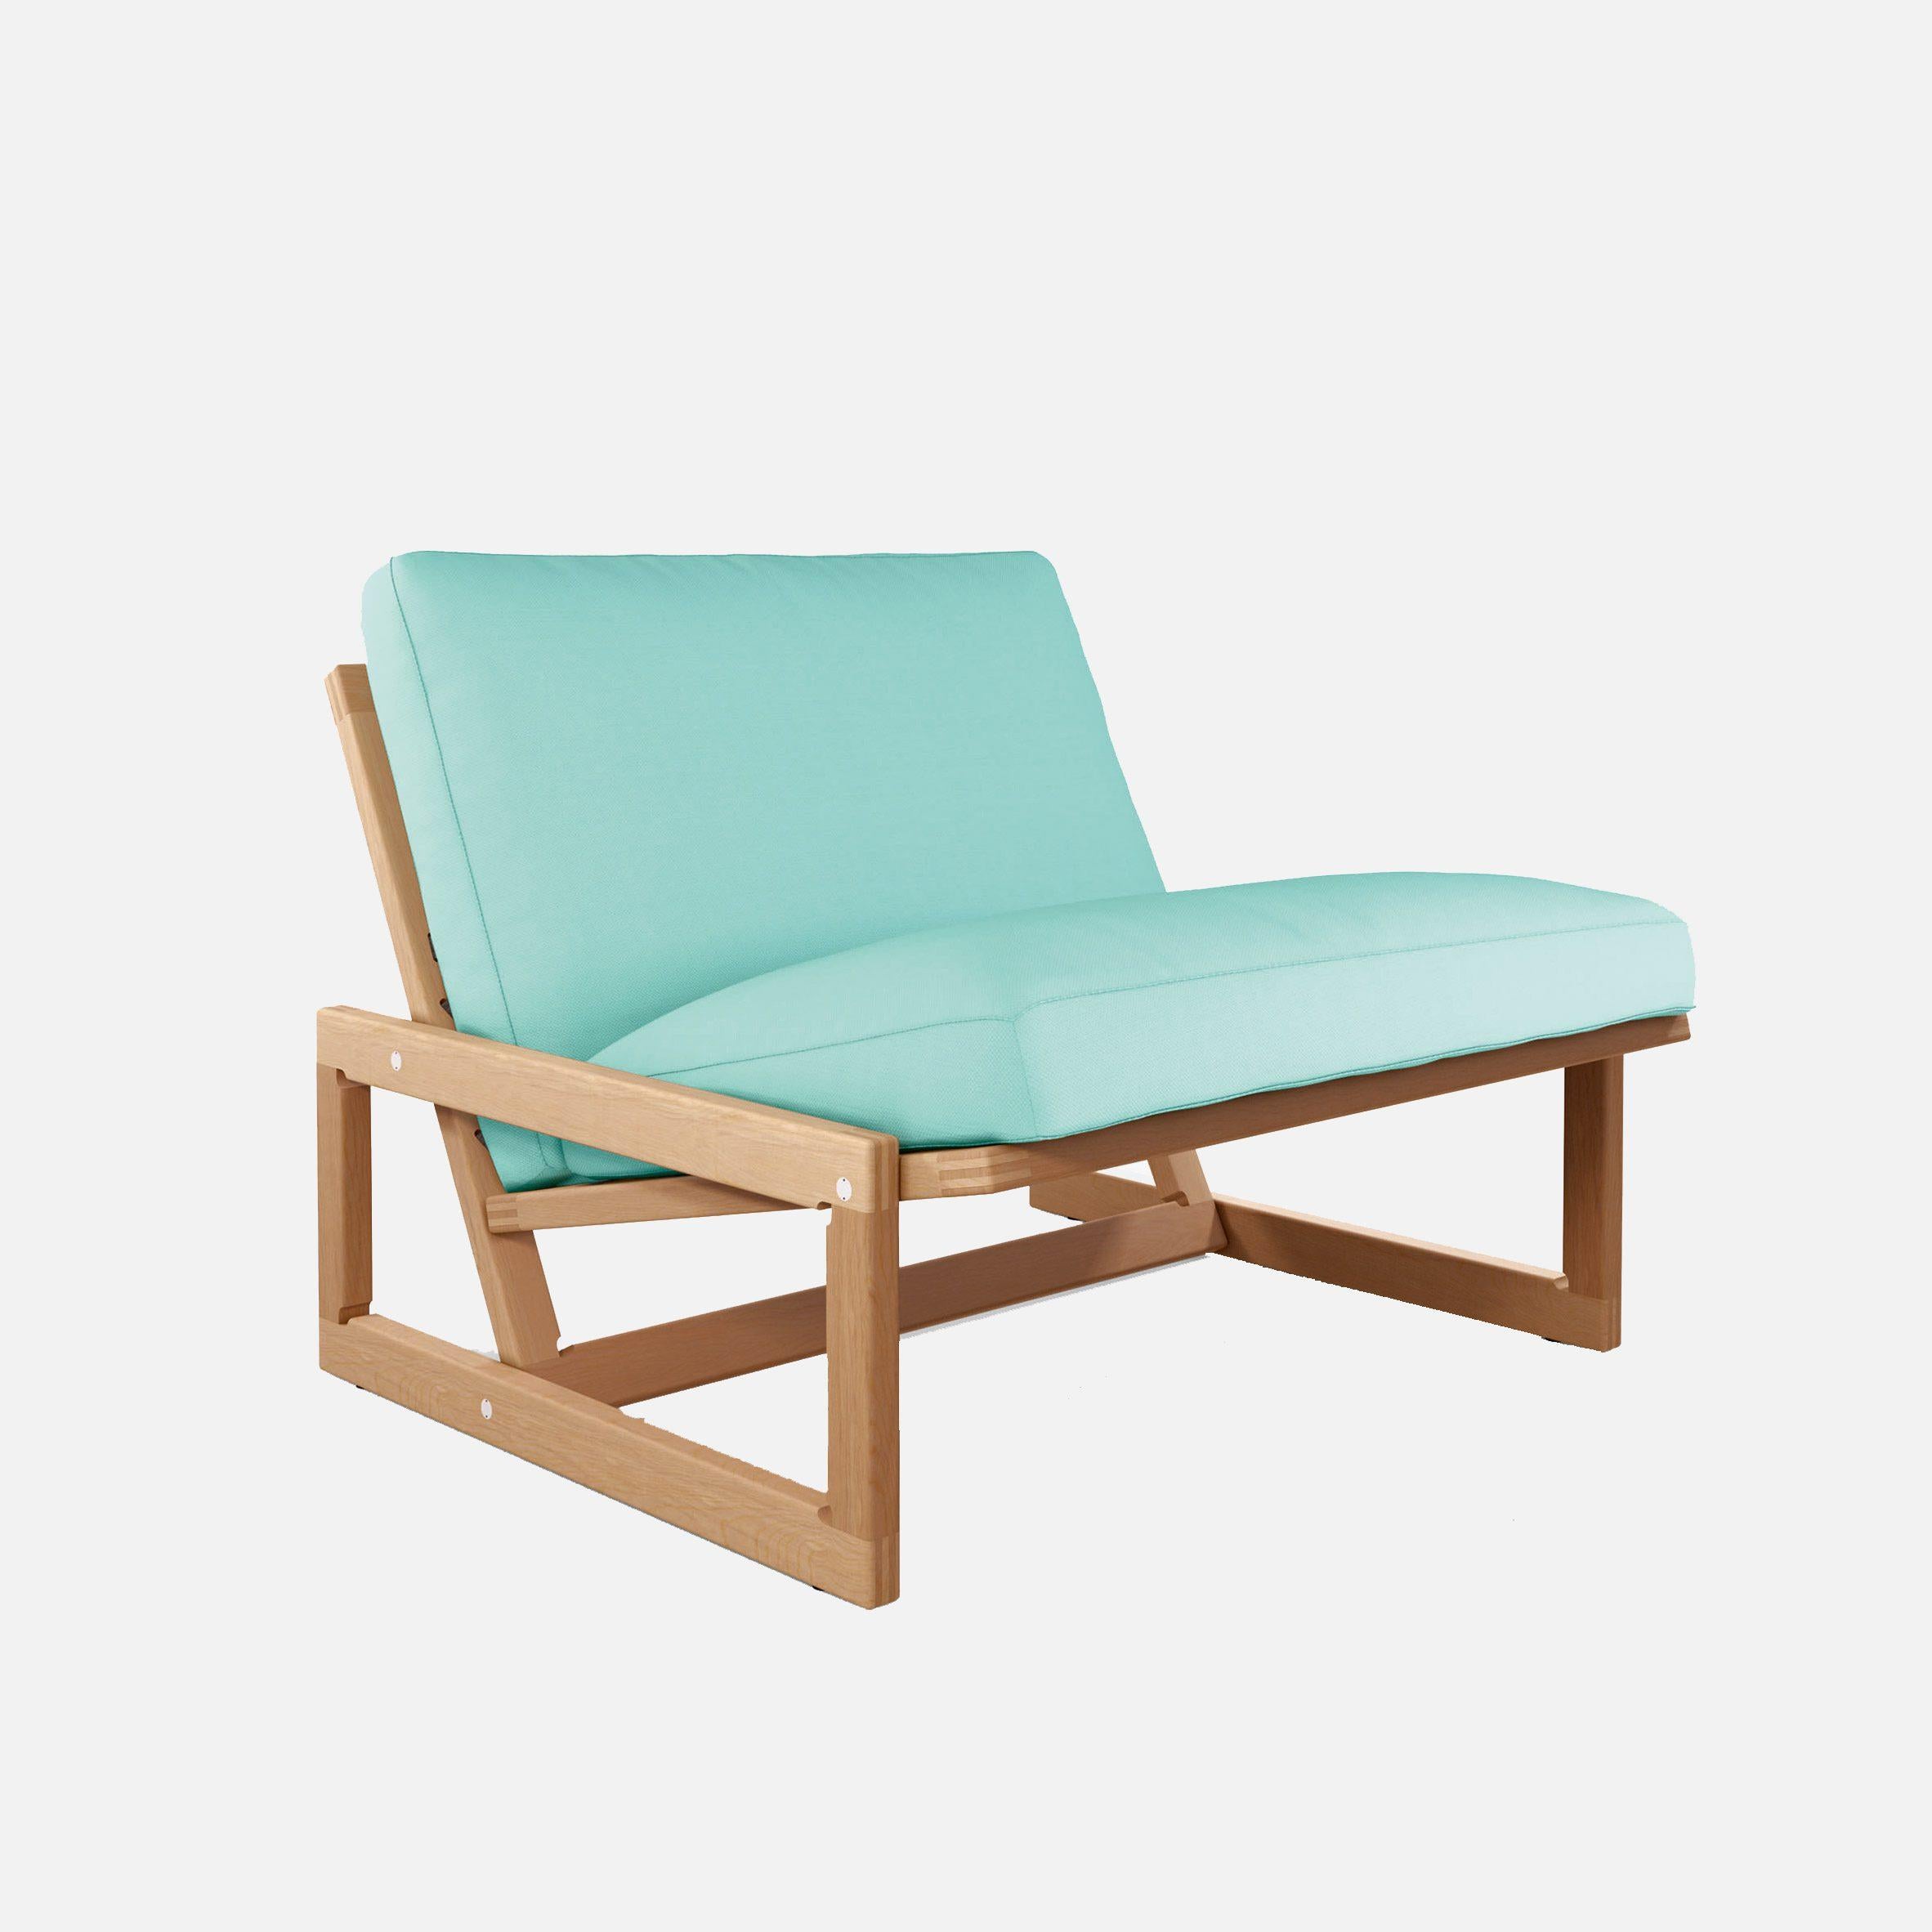 Mid-Century Modern Minimalist Outdoor Armchair by Tobia Scarpa for Cassina  For Sale